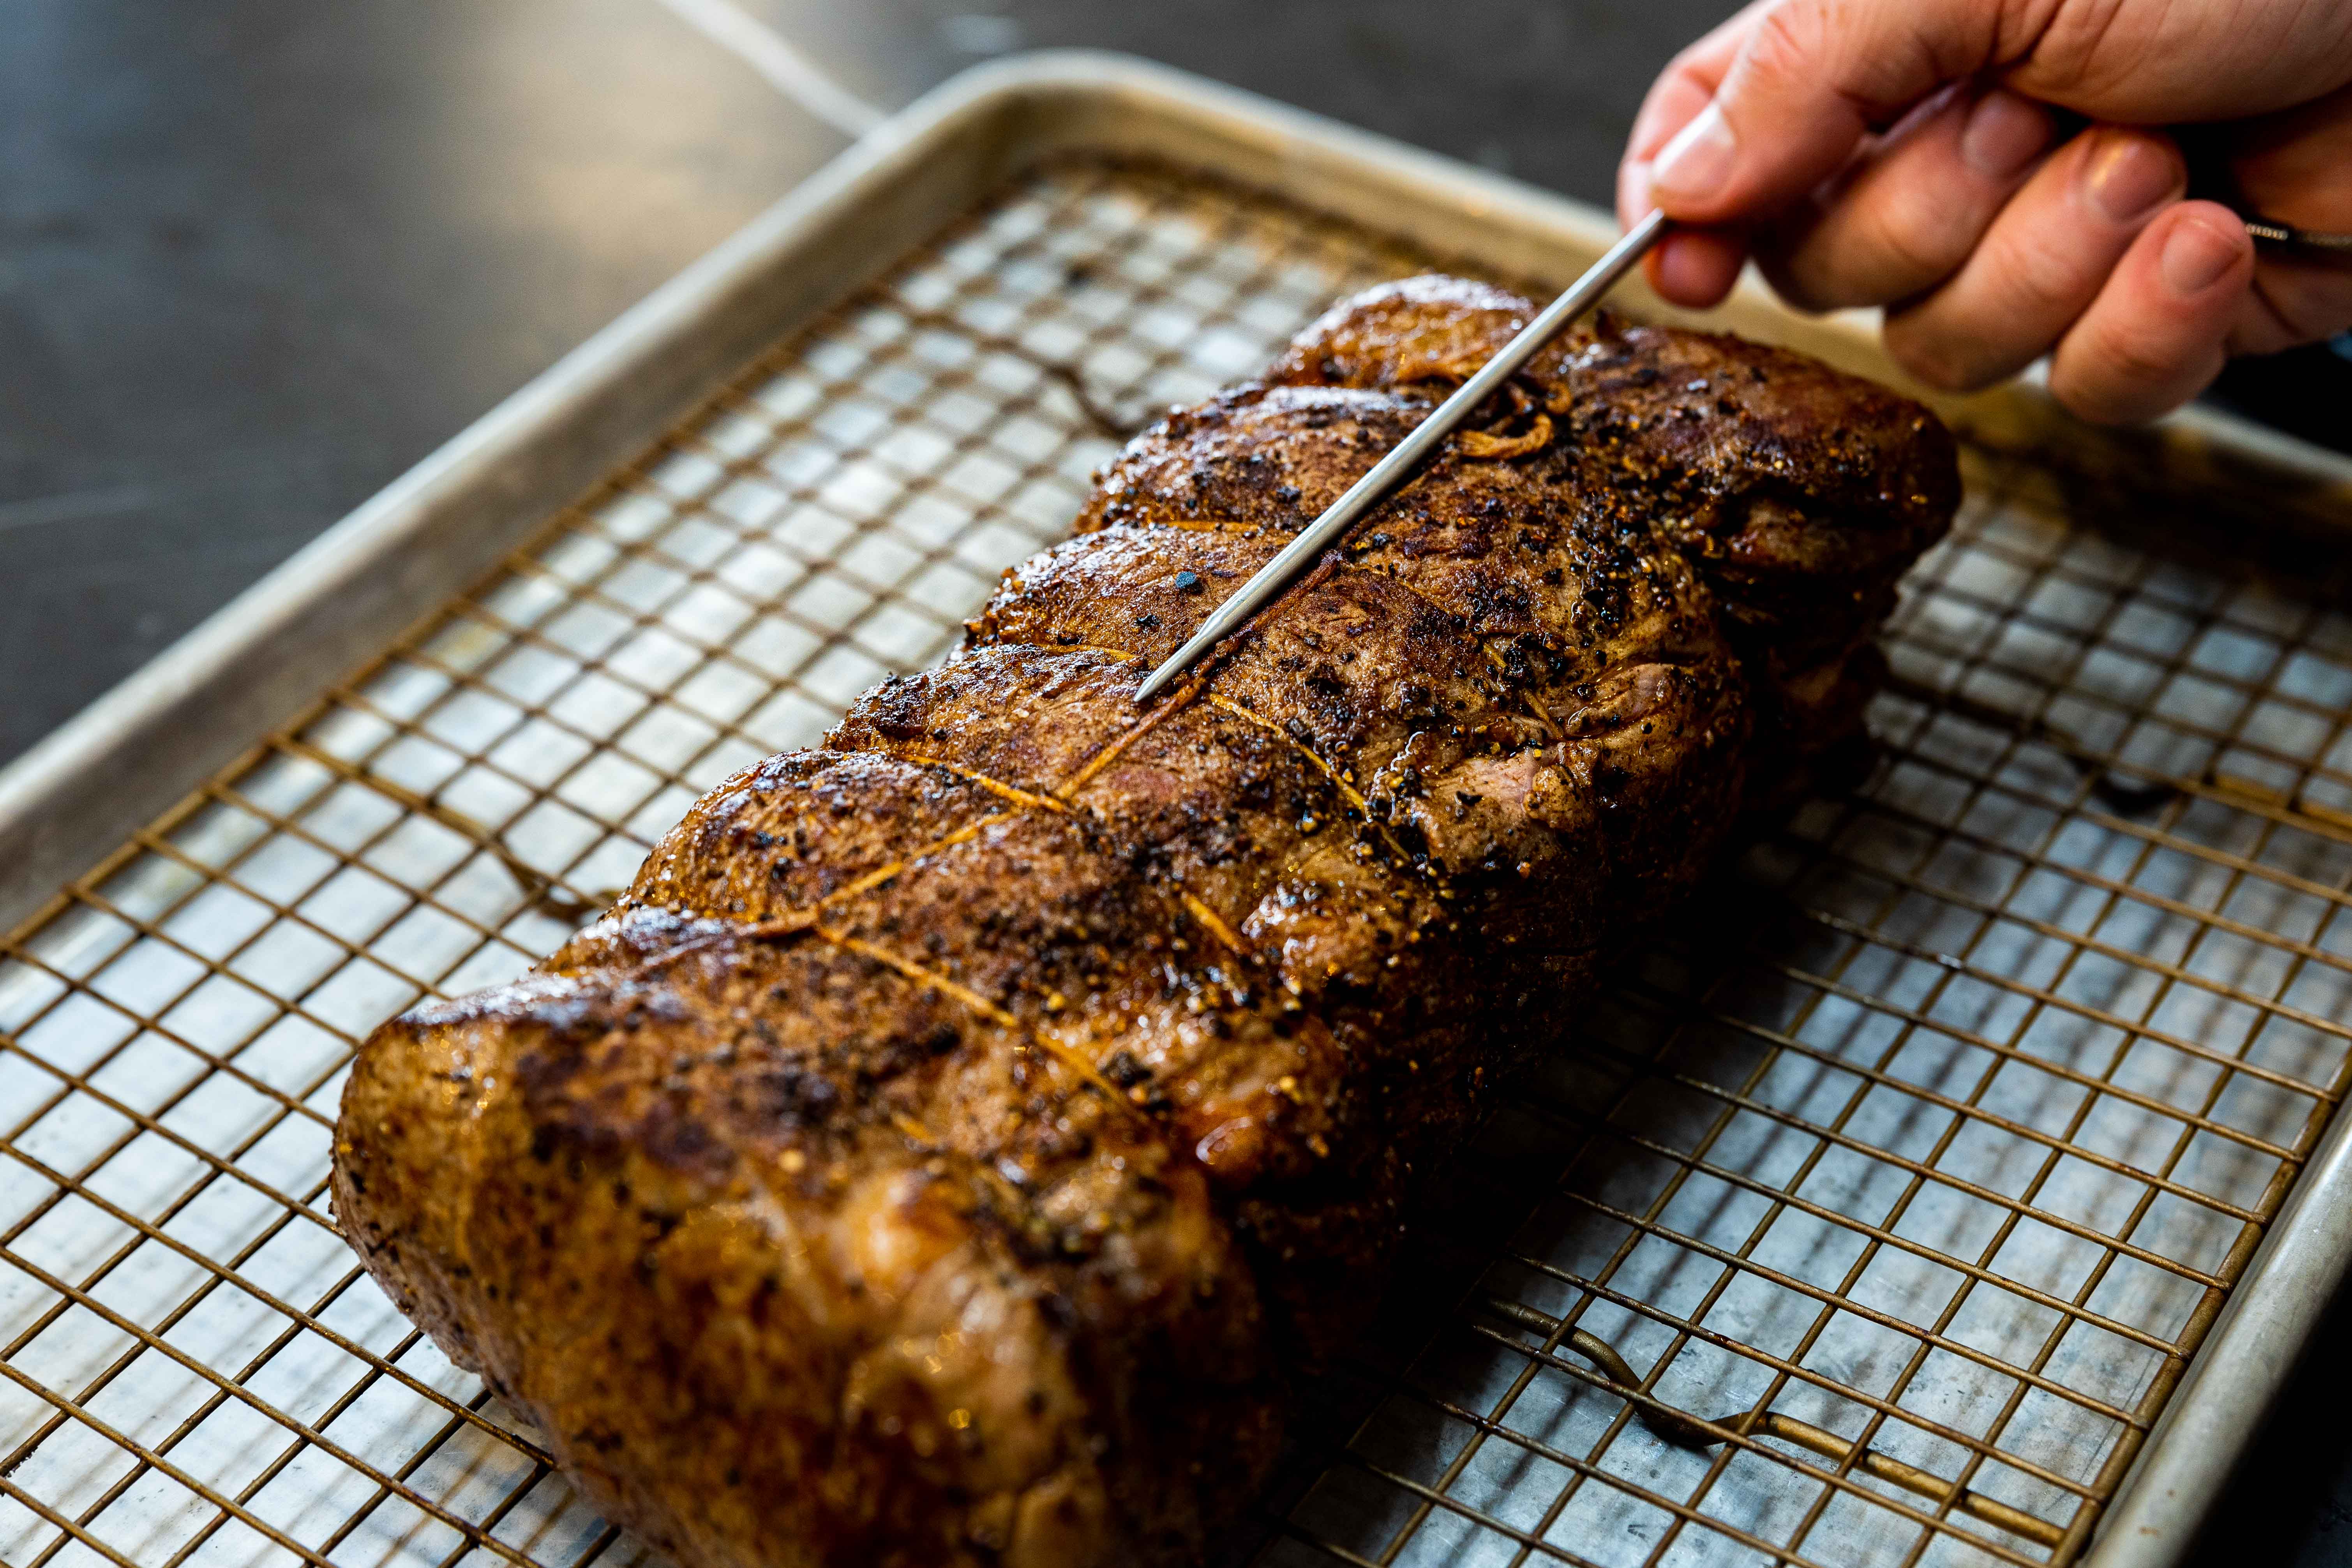 Probing an eye of rib roast with a leave-in thermometer probe